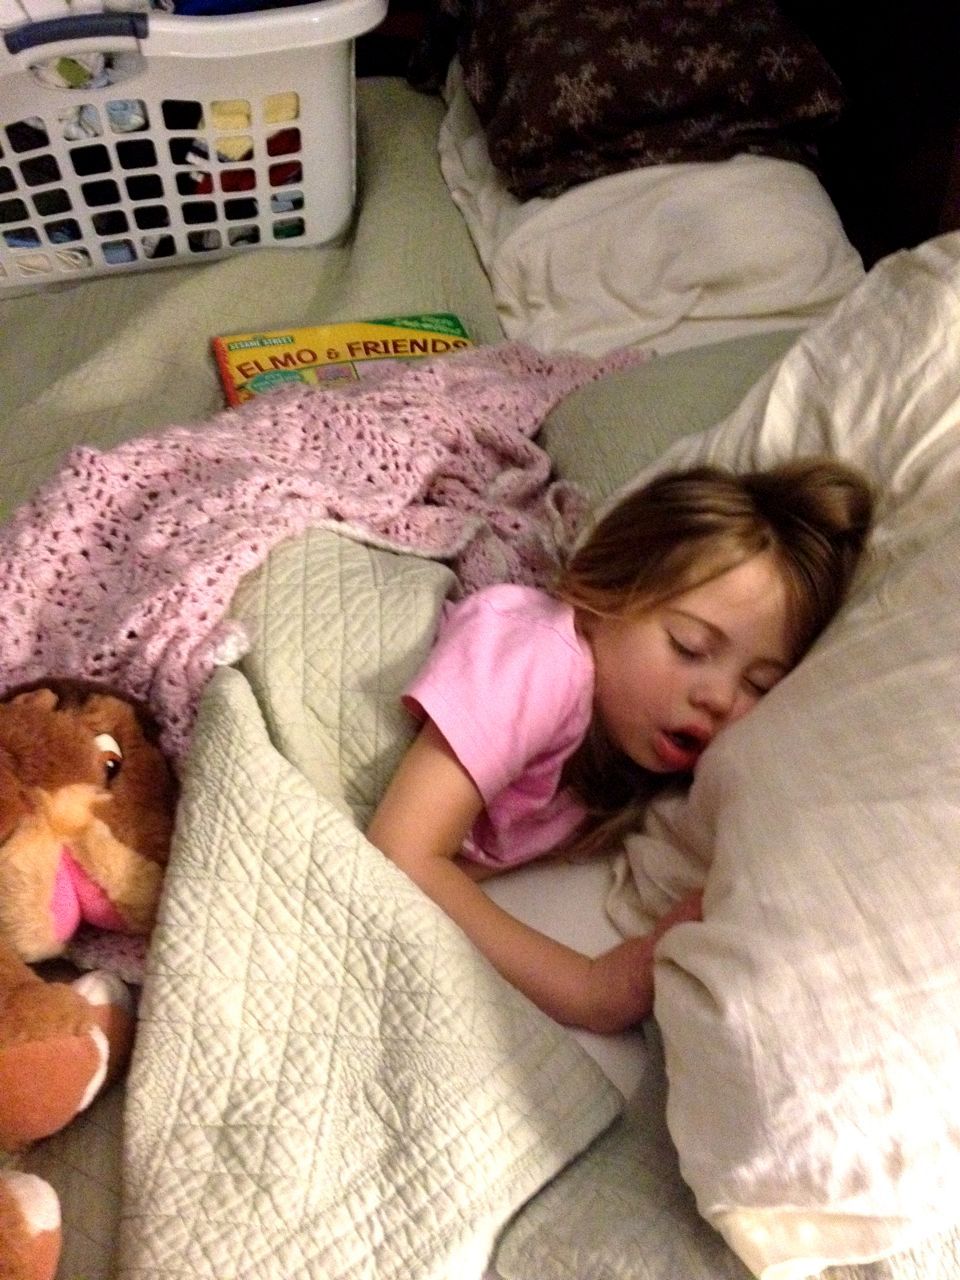  She's made herself quite cozy by bringing her Elmo book to bed, the pink blanket I made for her, and 